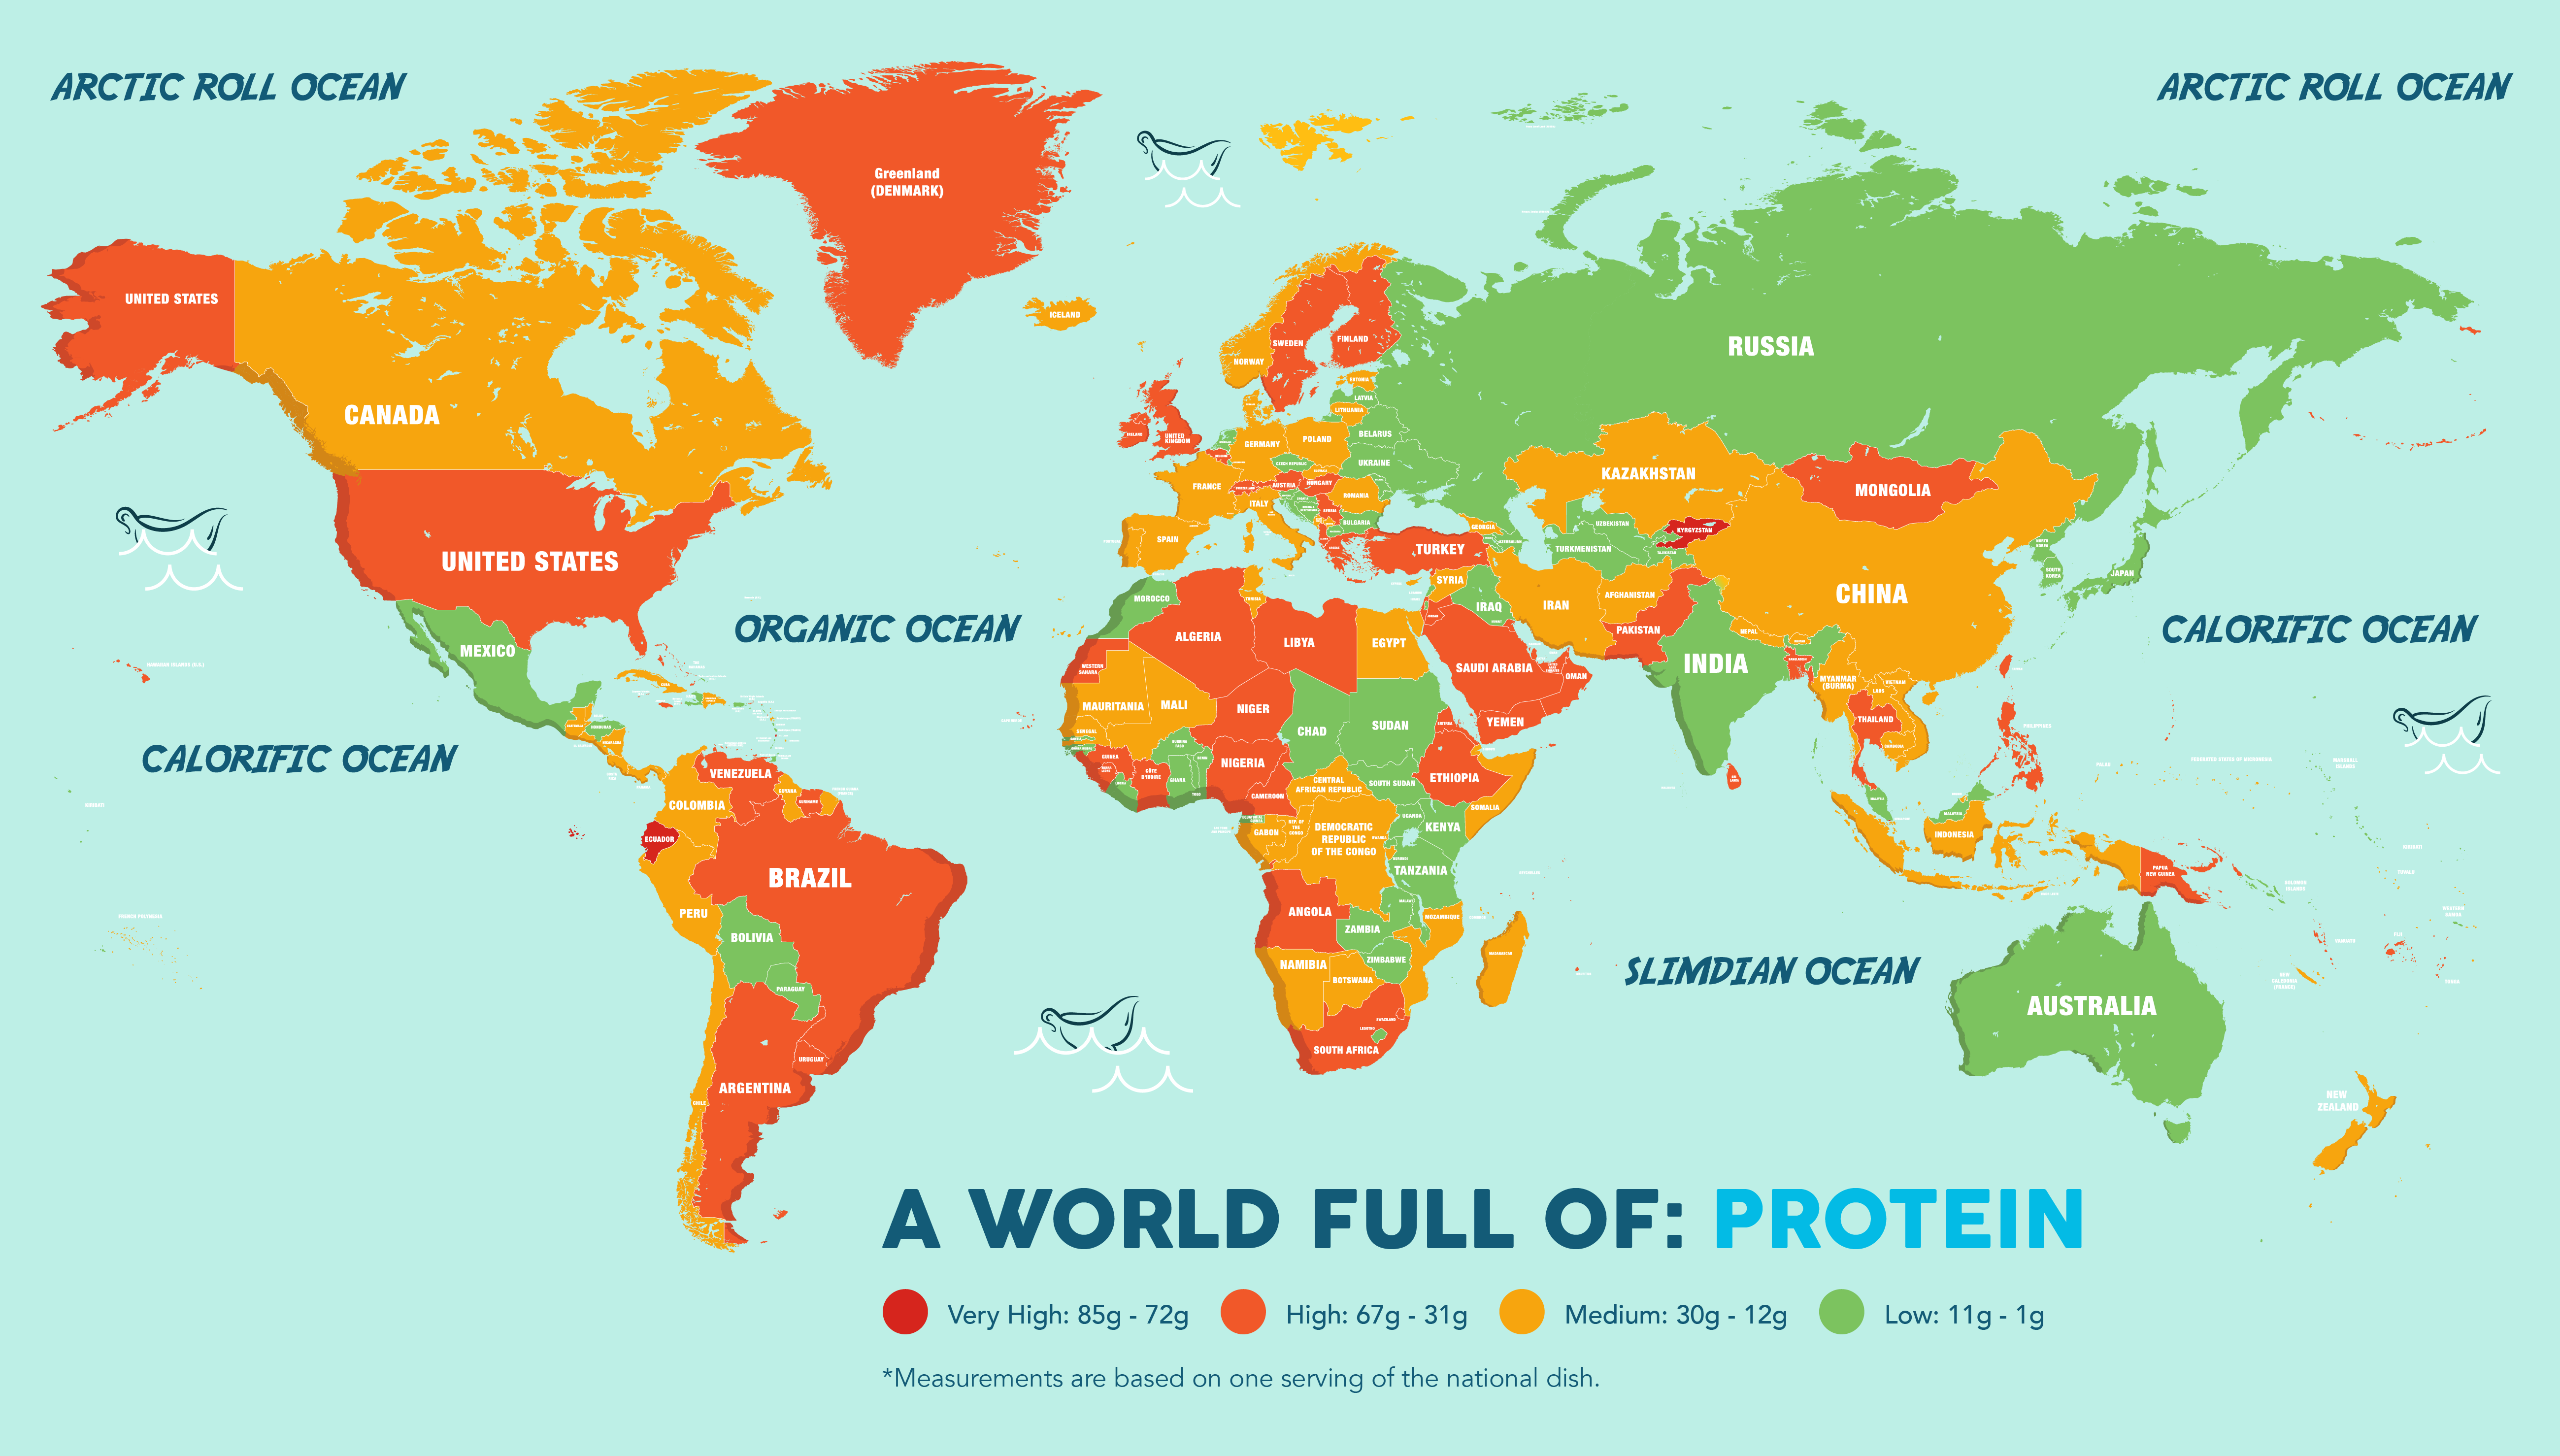 a world map showing national dishes by protein.